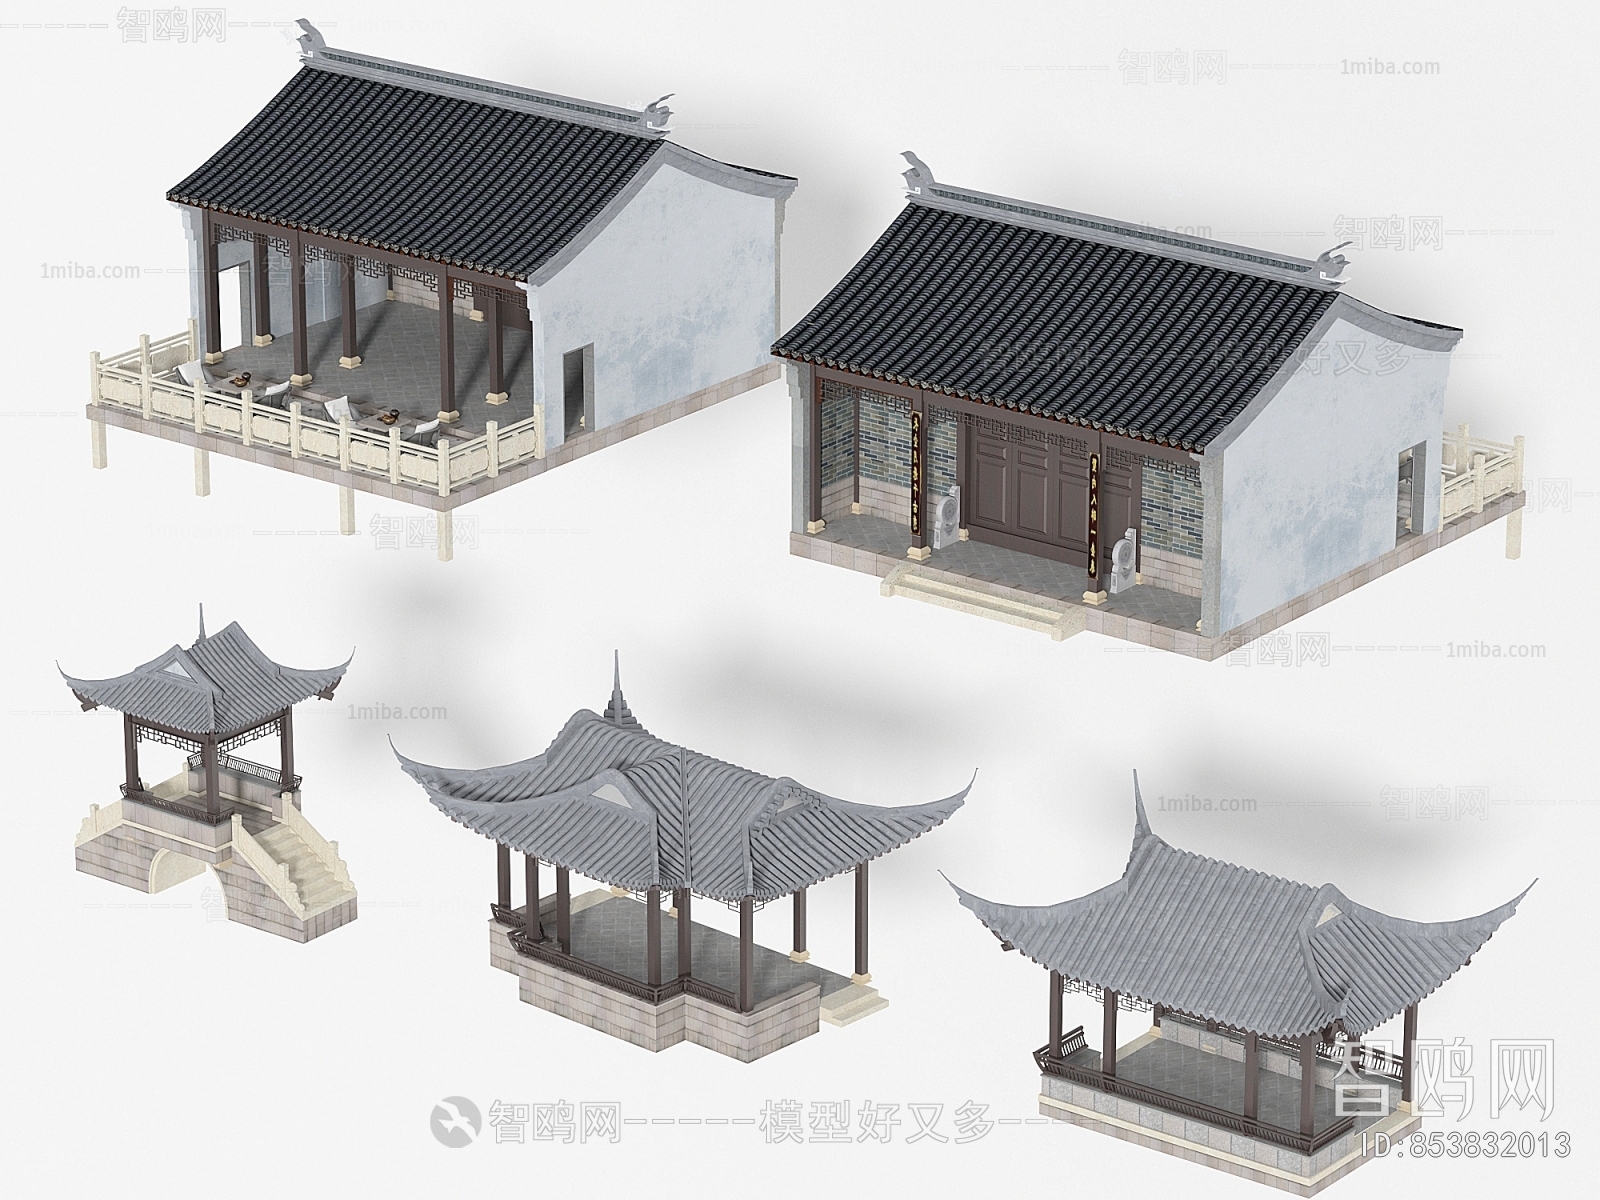 Chinese Style Building Appearance